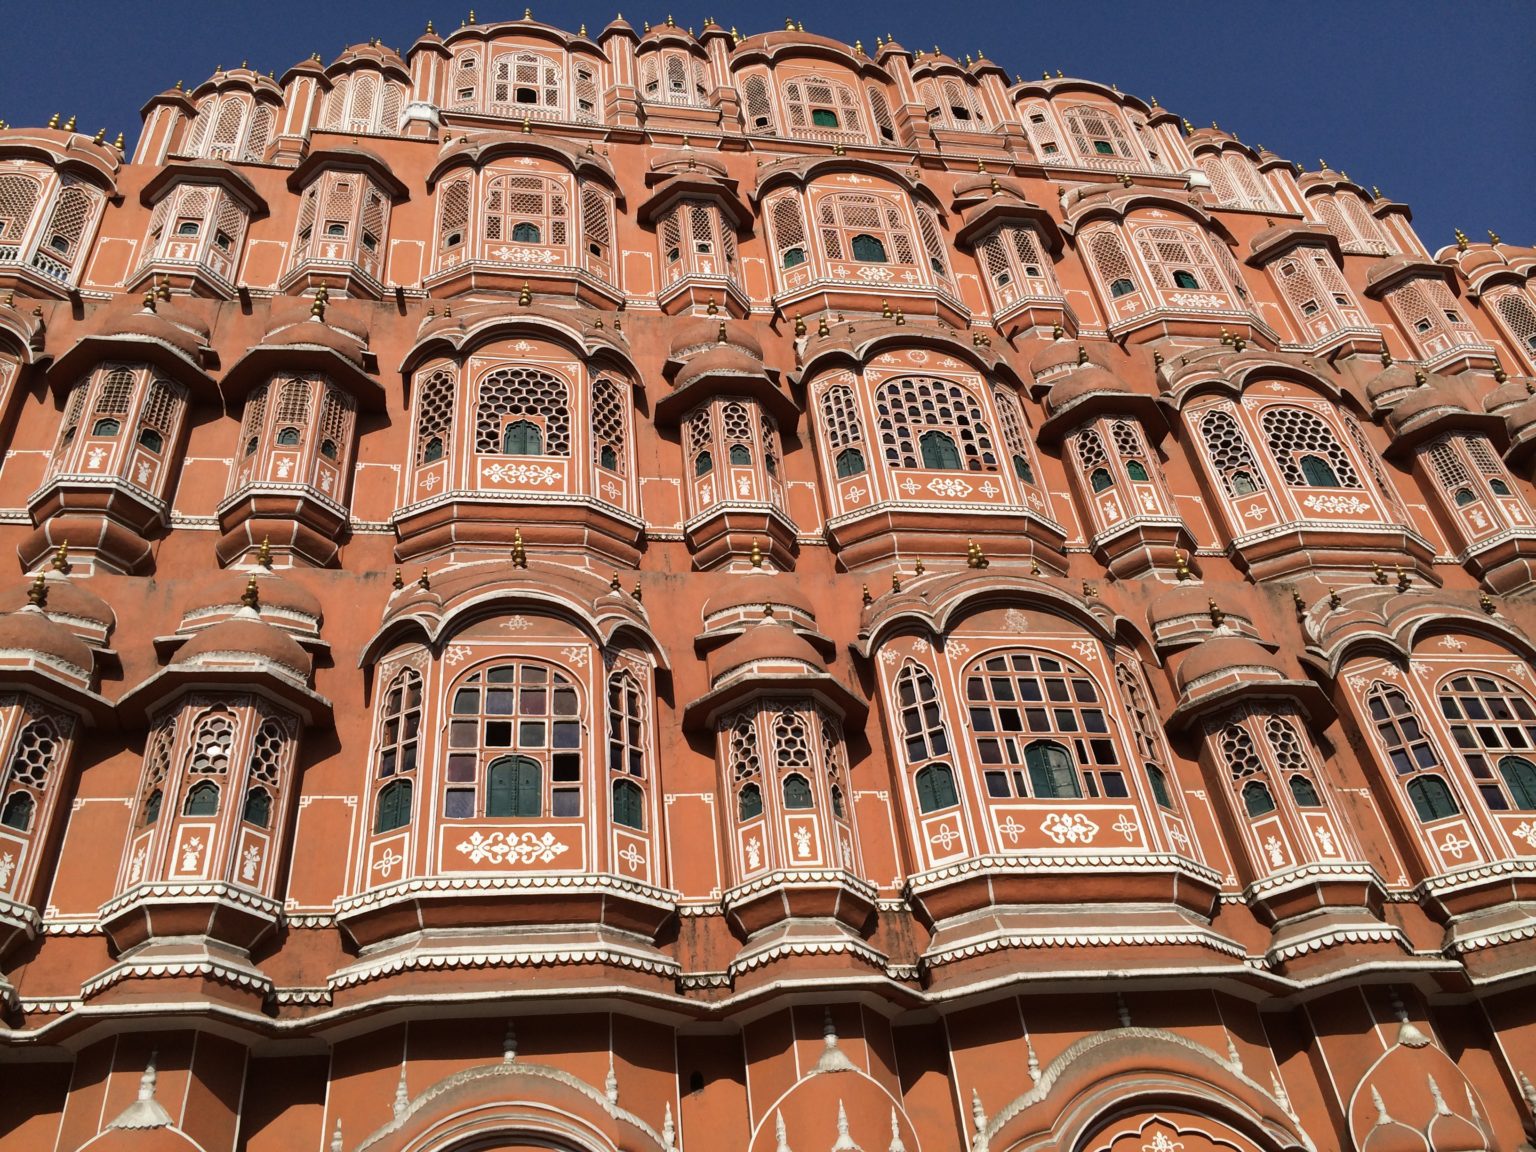 close up photo of the Palace of Winds in Jaipur